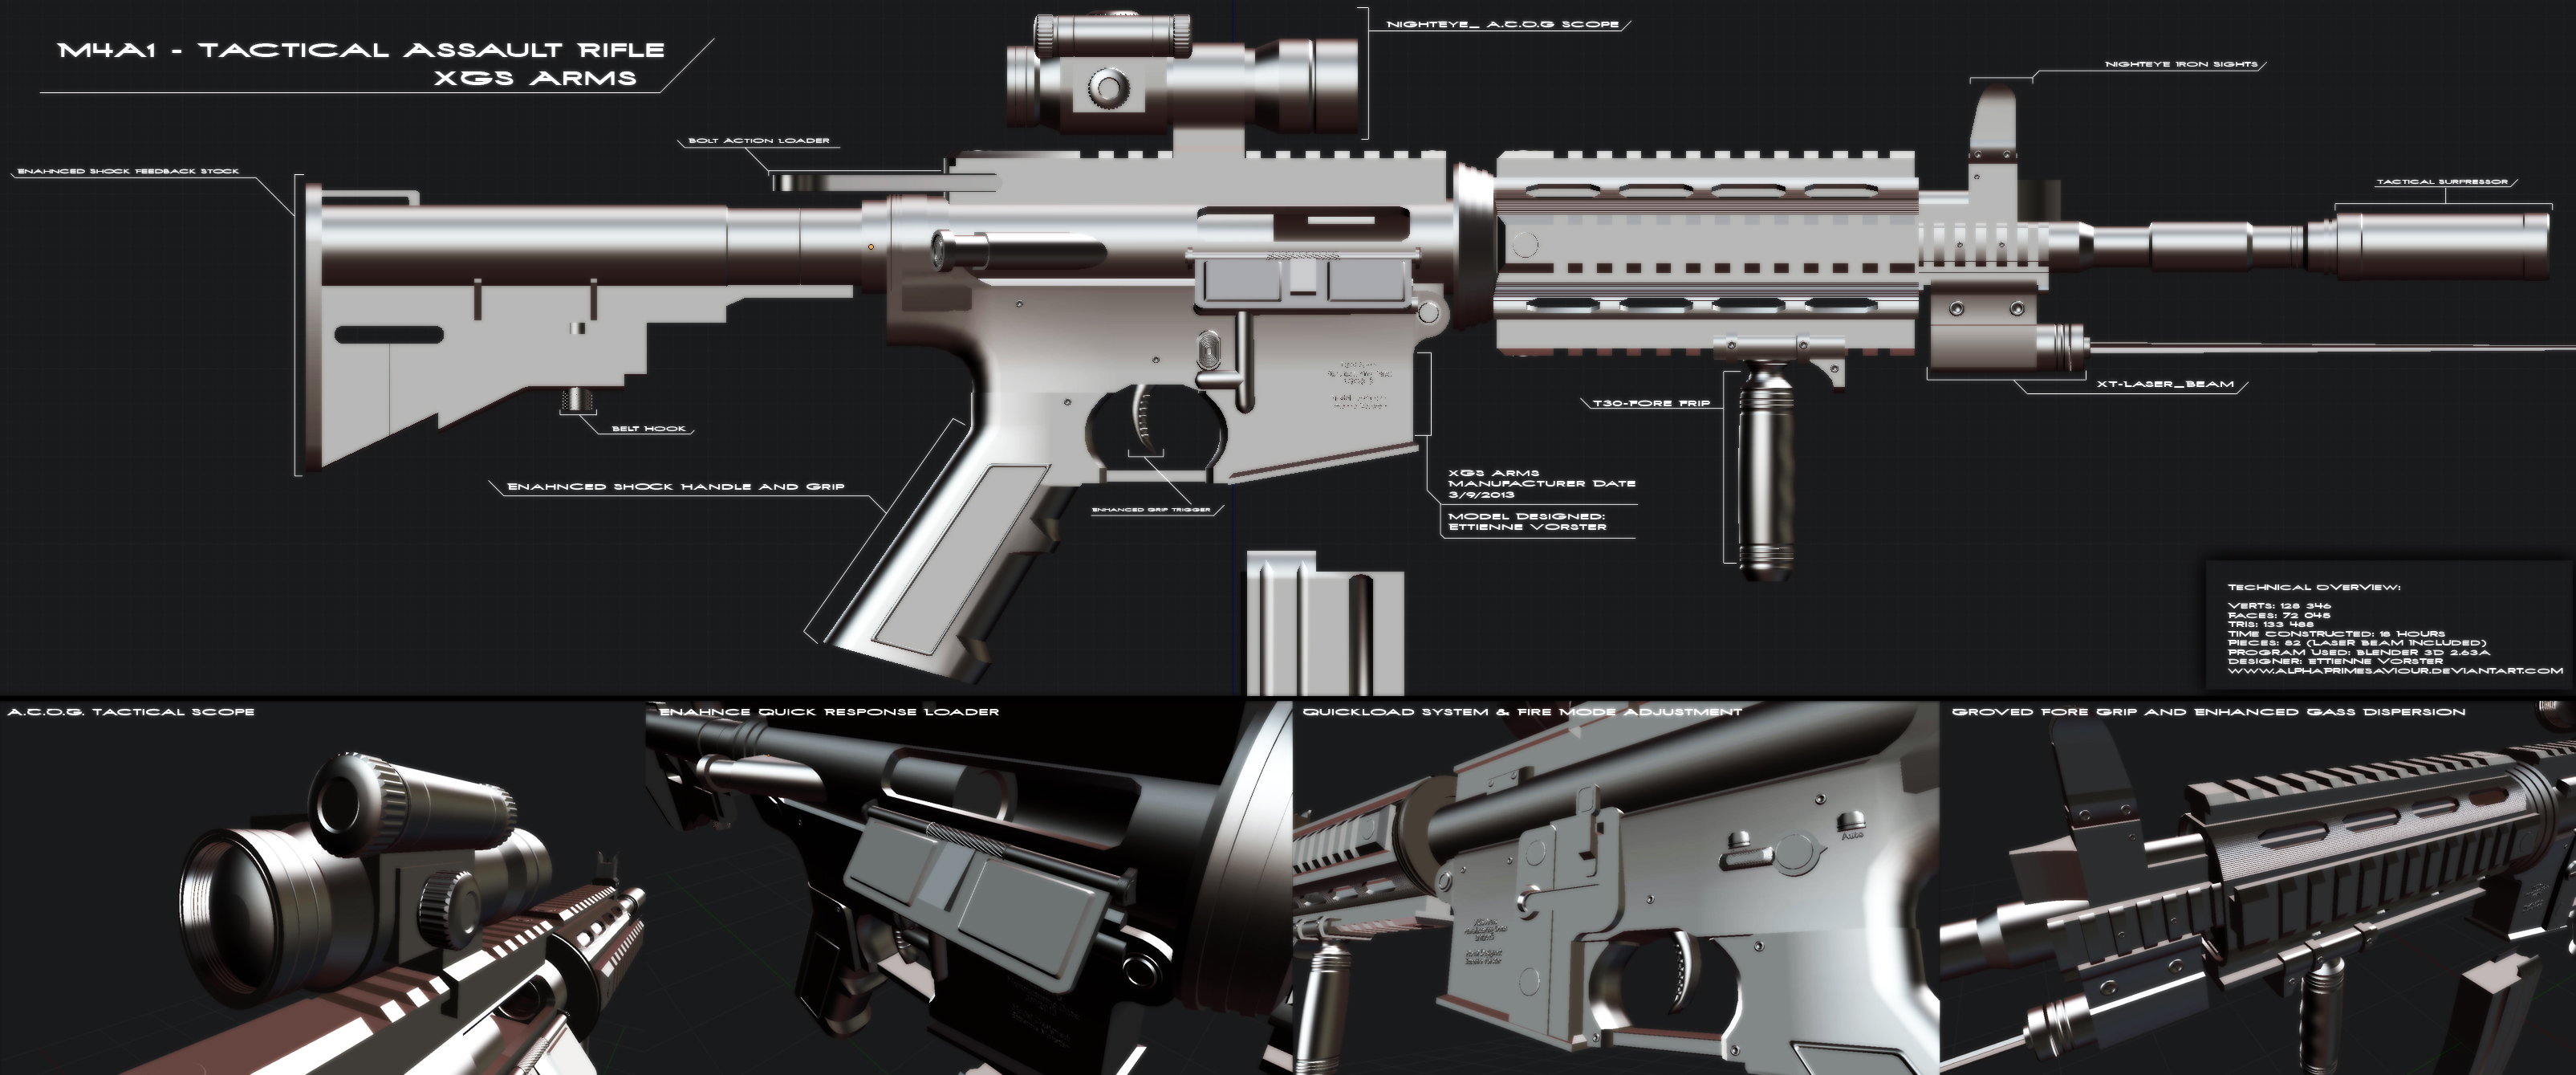 M4a1 Weapon Gun Military Rifle Police Poster Y Wallpaper Background